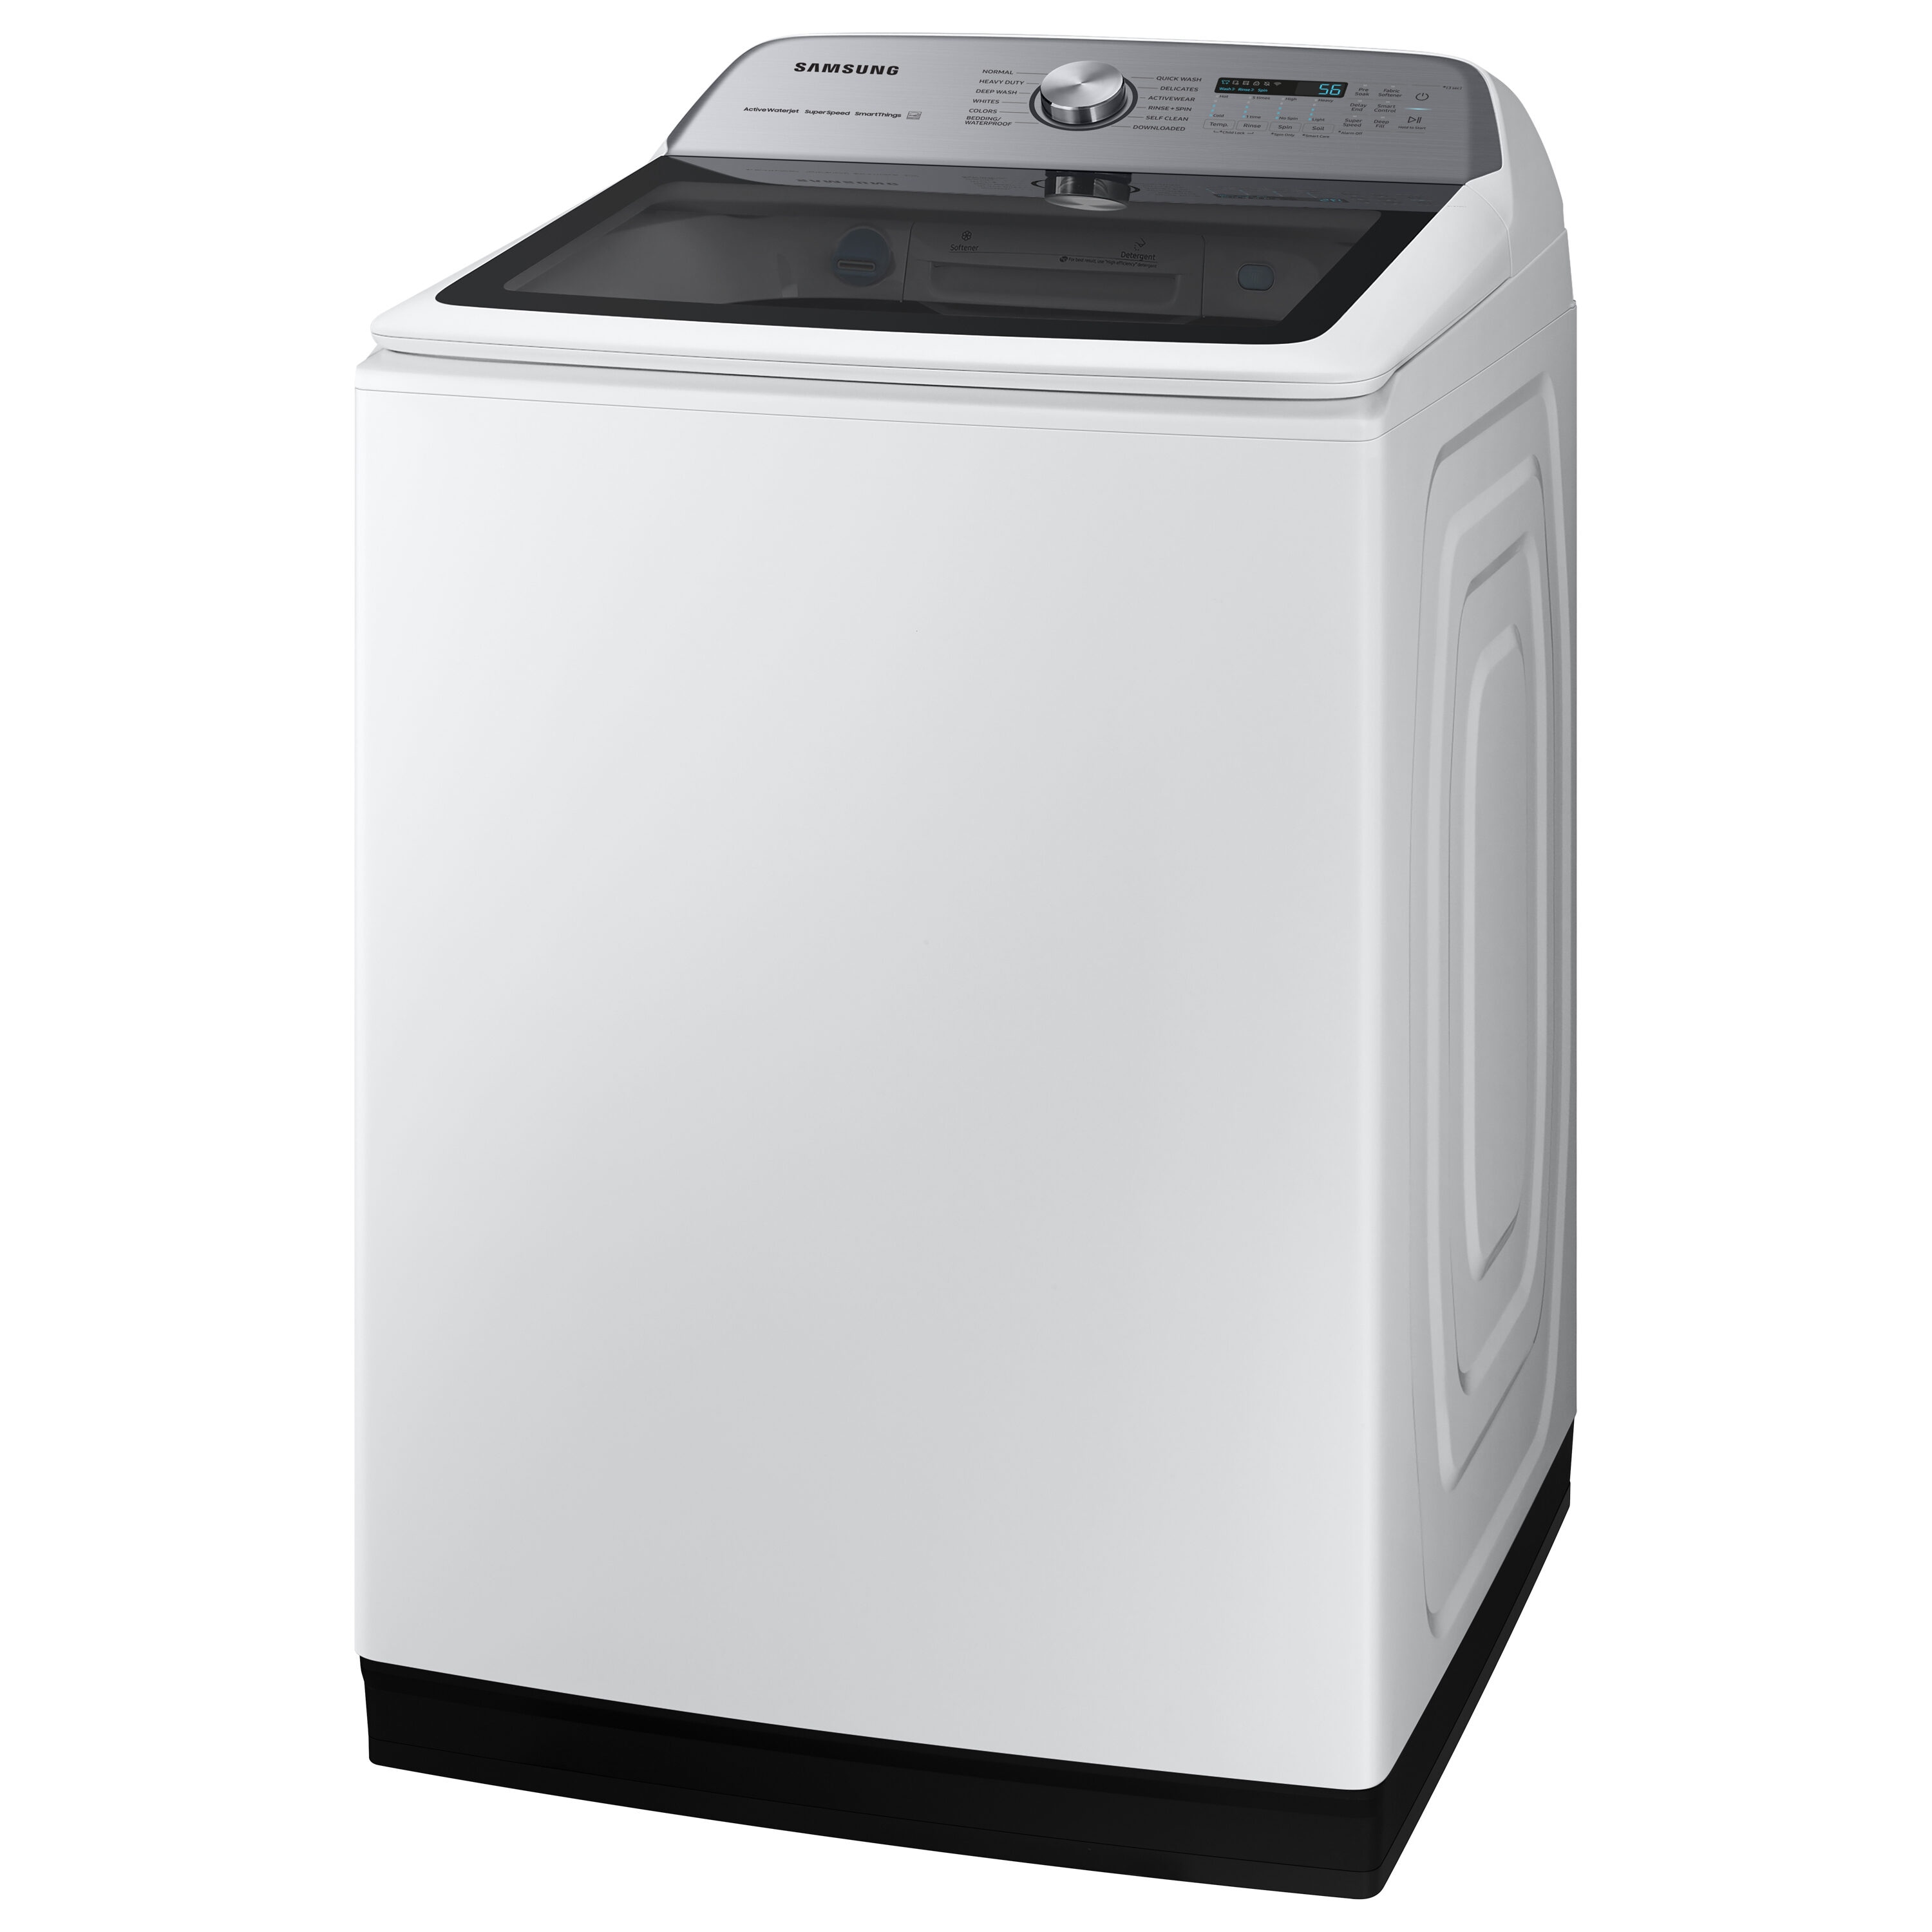 WA51A5505AC/US, 5.1 cu. ft. Smart Top Load Washer with ActiveWave™  Agitator and Super Speed Wash in Champagne